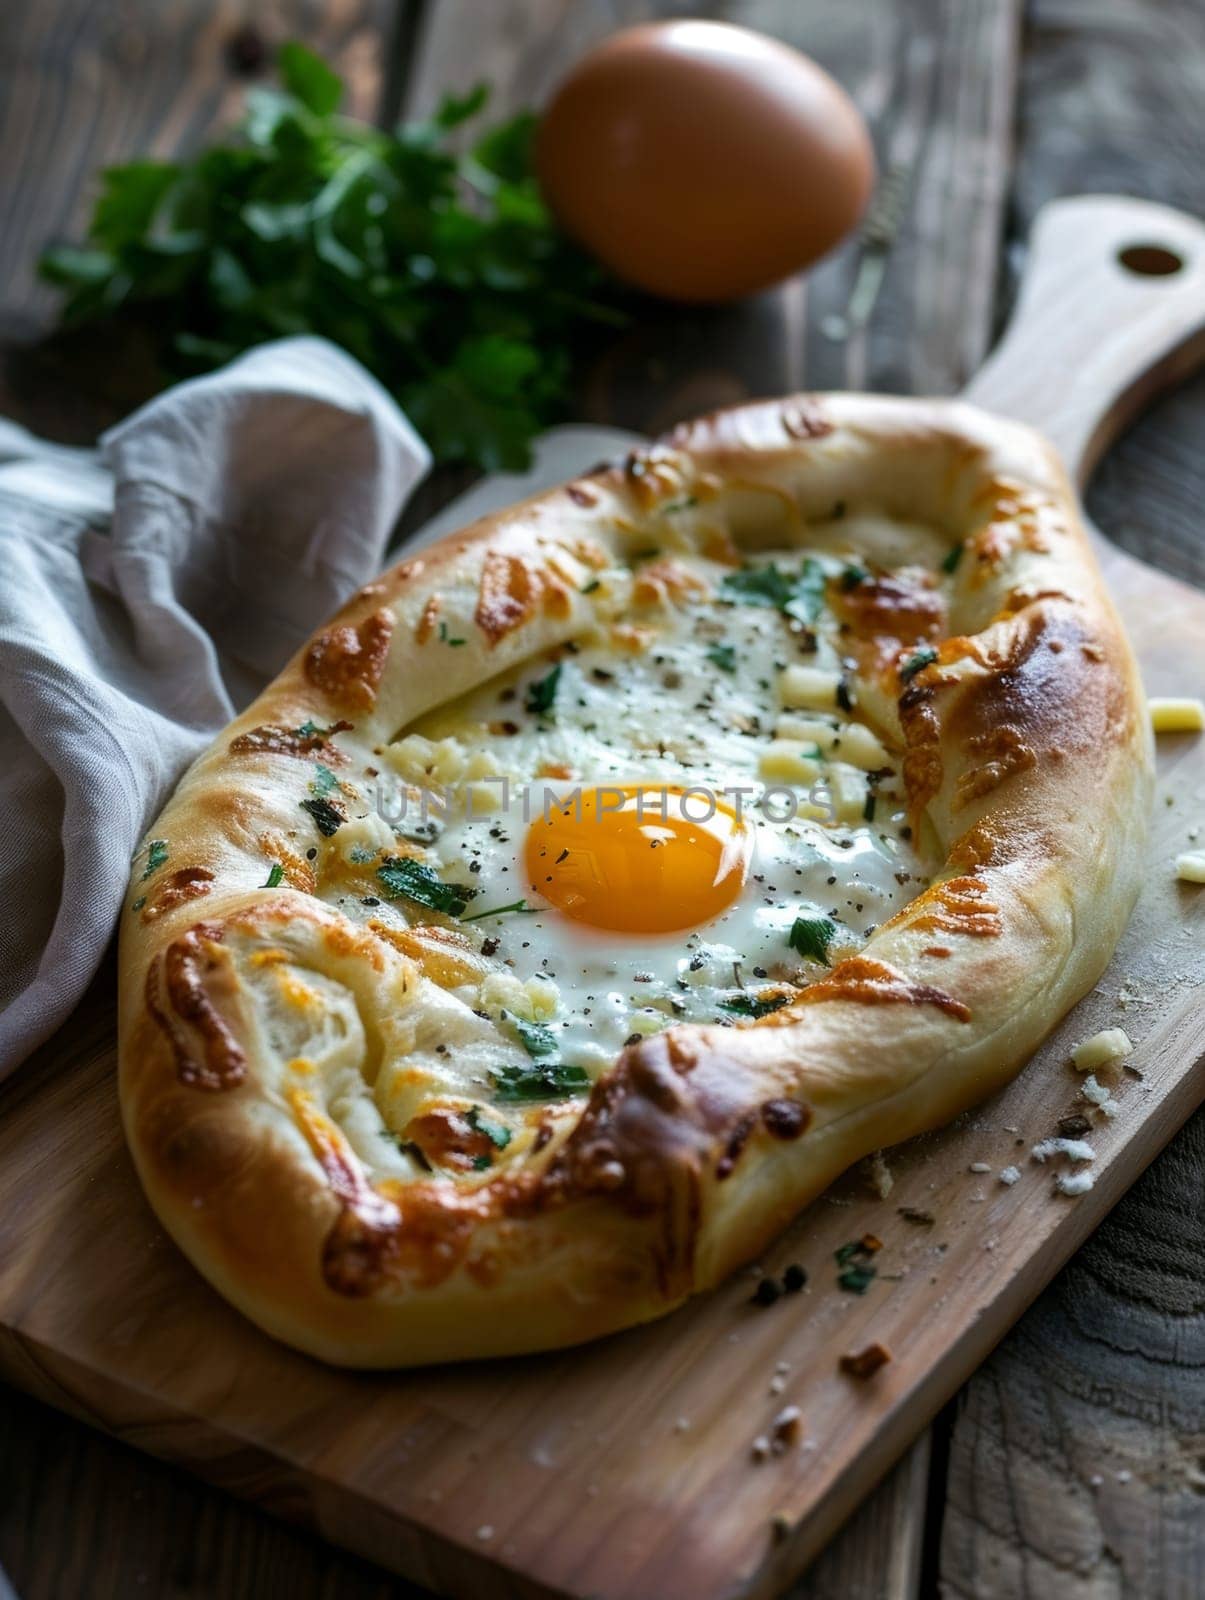 Traditional Georgian khachapuri, a cheesy bread with an egg baked in the center, served on a wooden paddle. This indulgent and comforting dish reflects unique culinary heritage of the Caucasus region. by sfinks